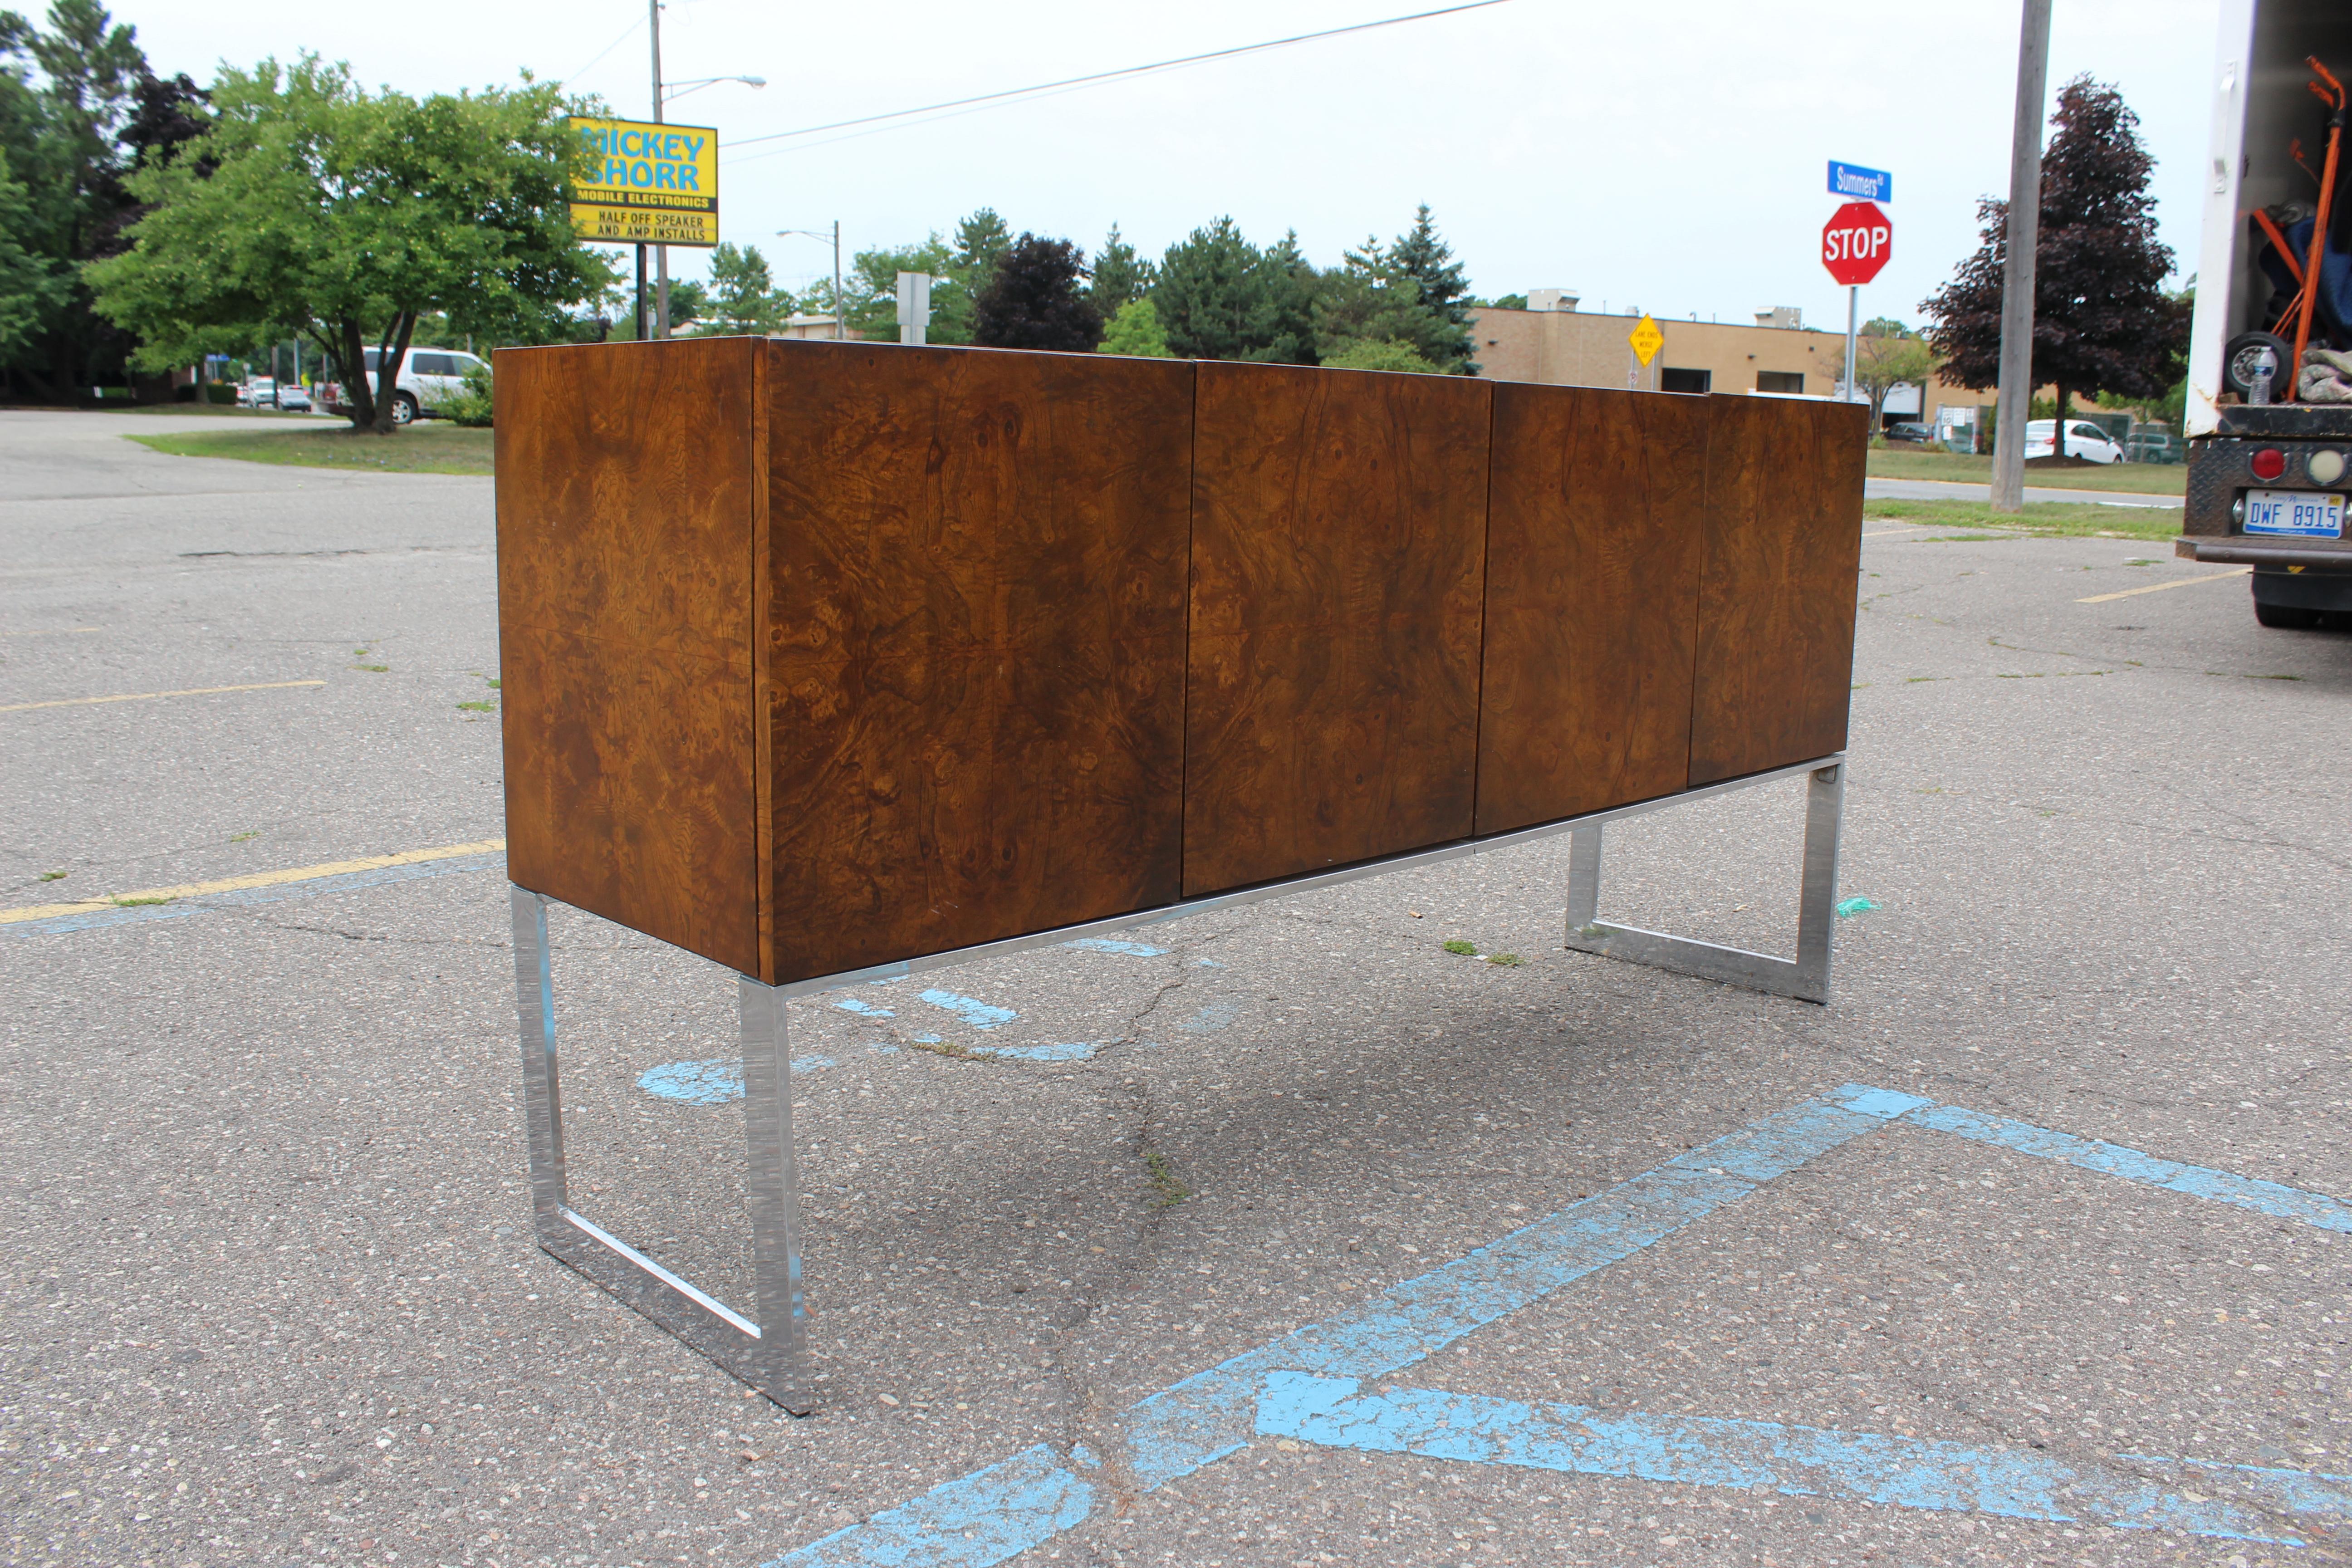 For your consideration is a sideboard by Milo Baughman is composed of a stunning burl wood cabinet that is set on a light chrome frame. One half of the sideboard features adjustable shelving, while the other half features two cutlery drawers and